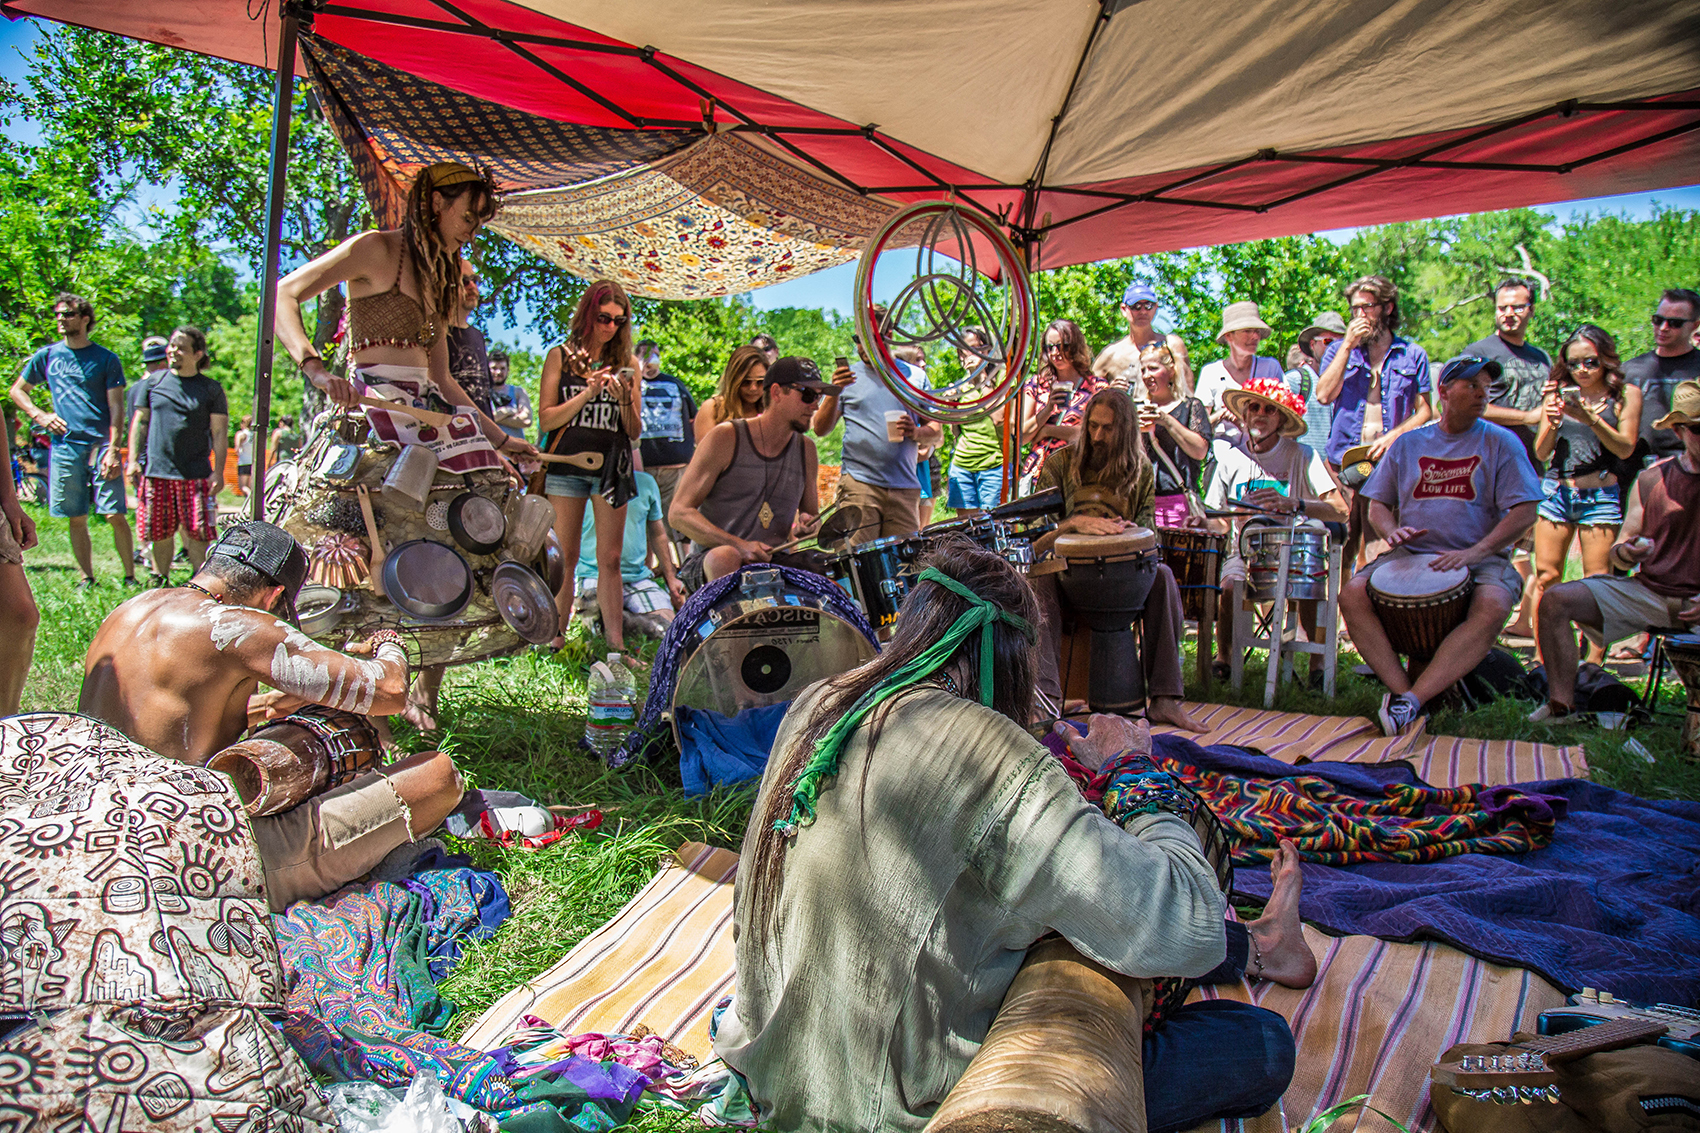 Drum Circle at Eeyore' Party Festival in Pease Park, Austin TX.s Birthday